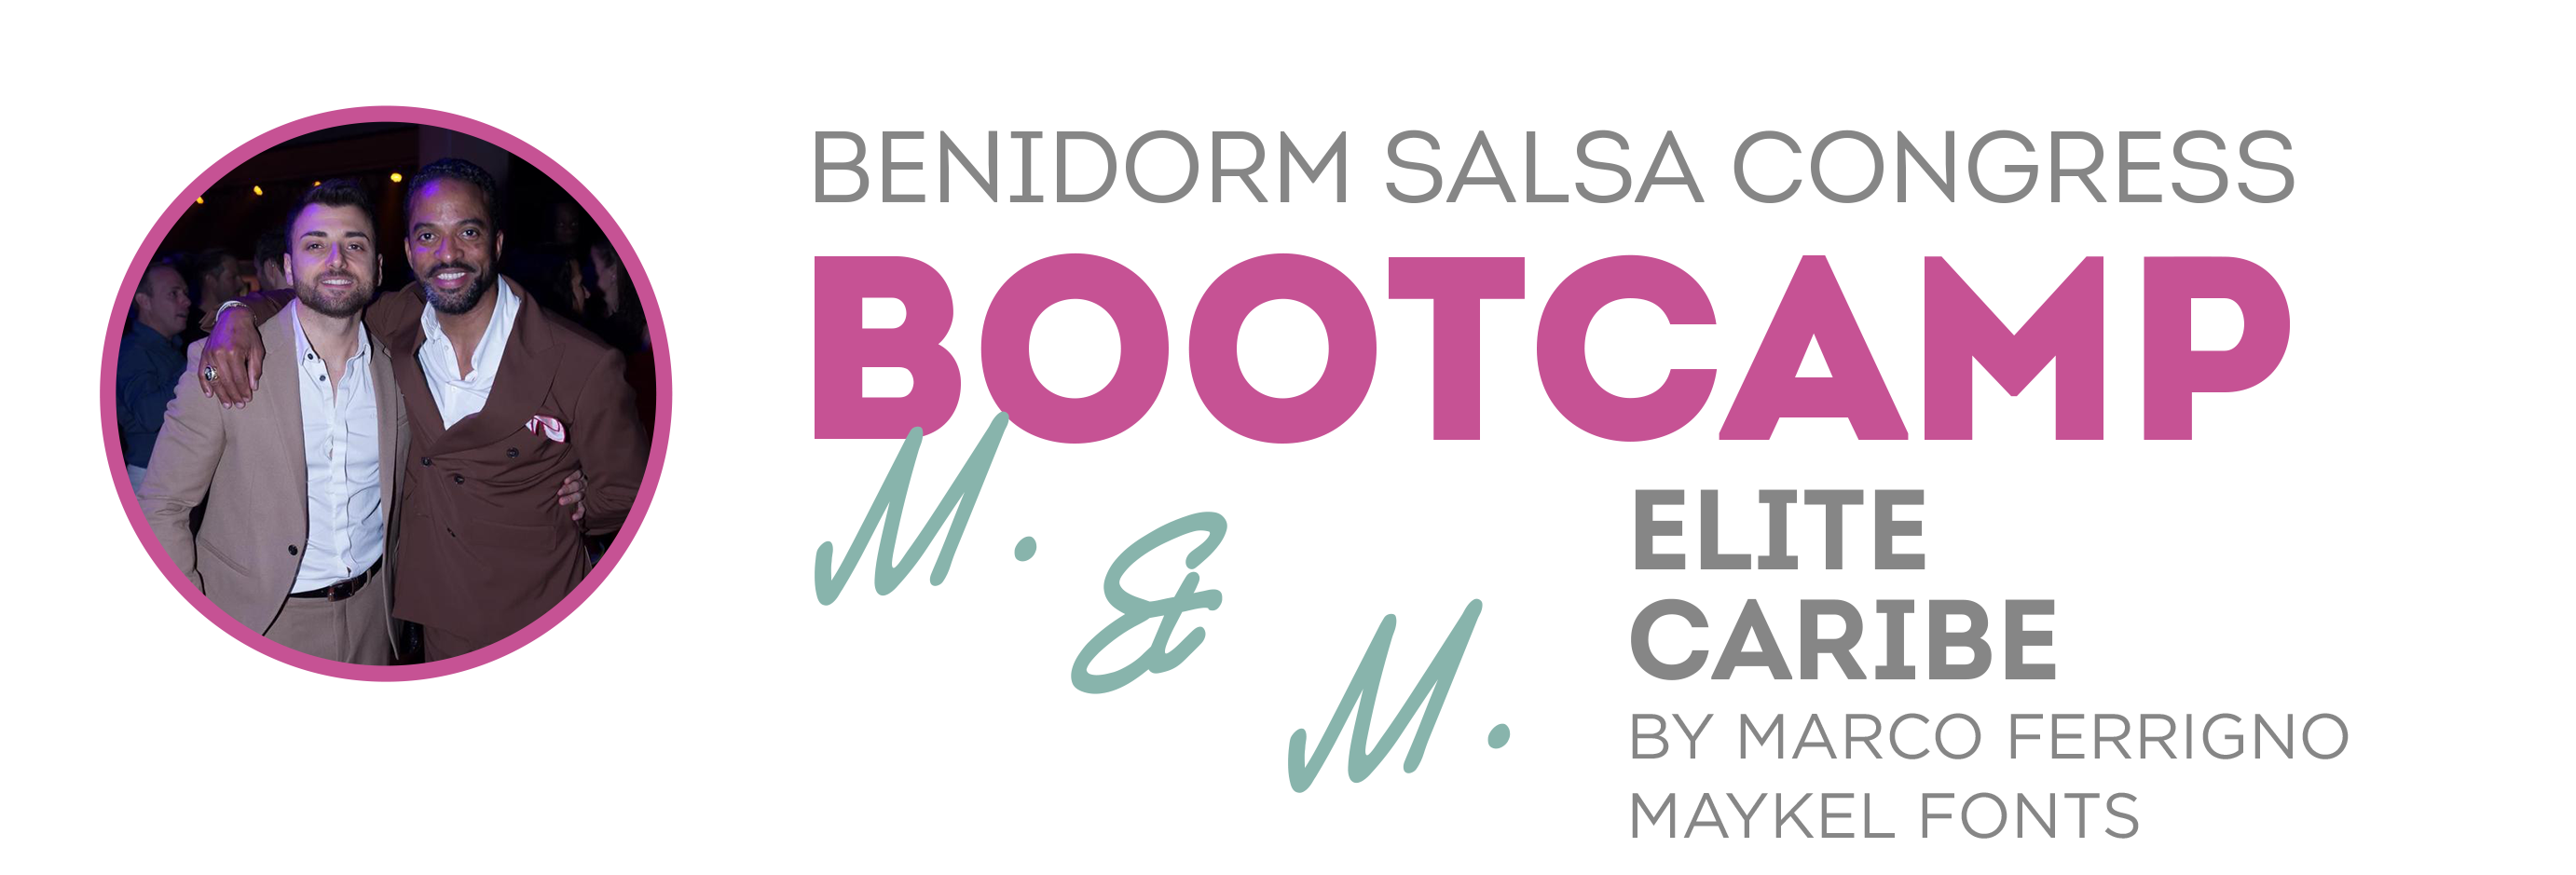 Bootcamp Marco Ferrigno & Maykel Fonts